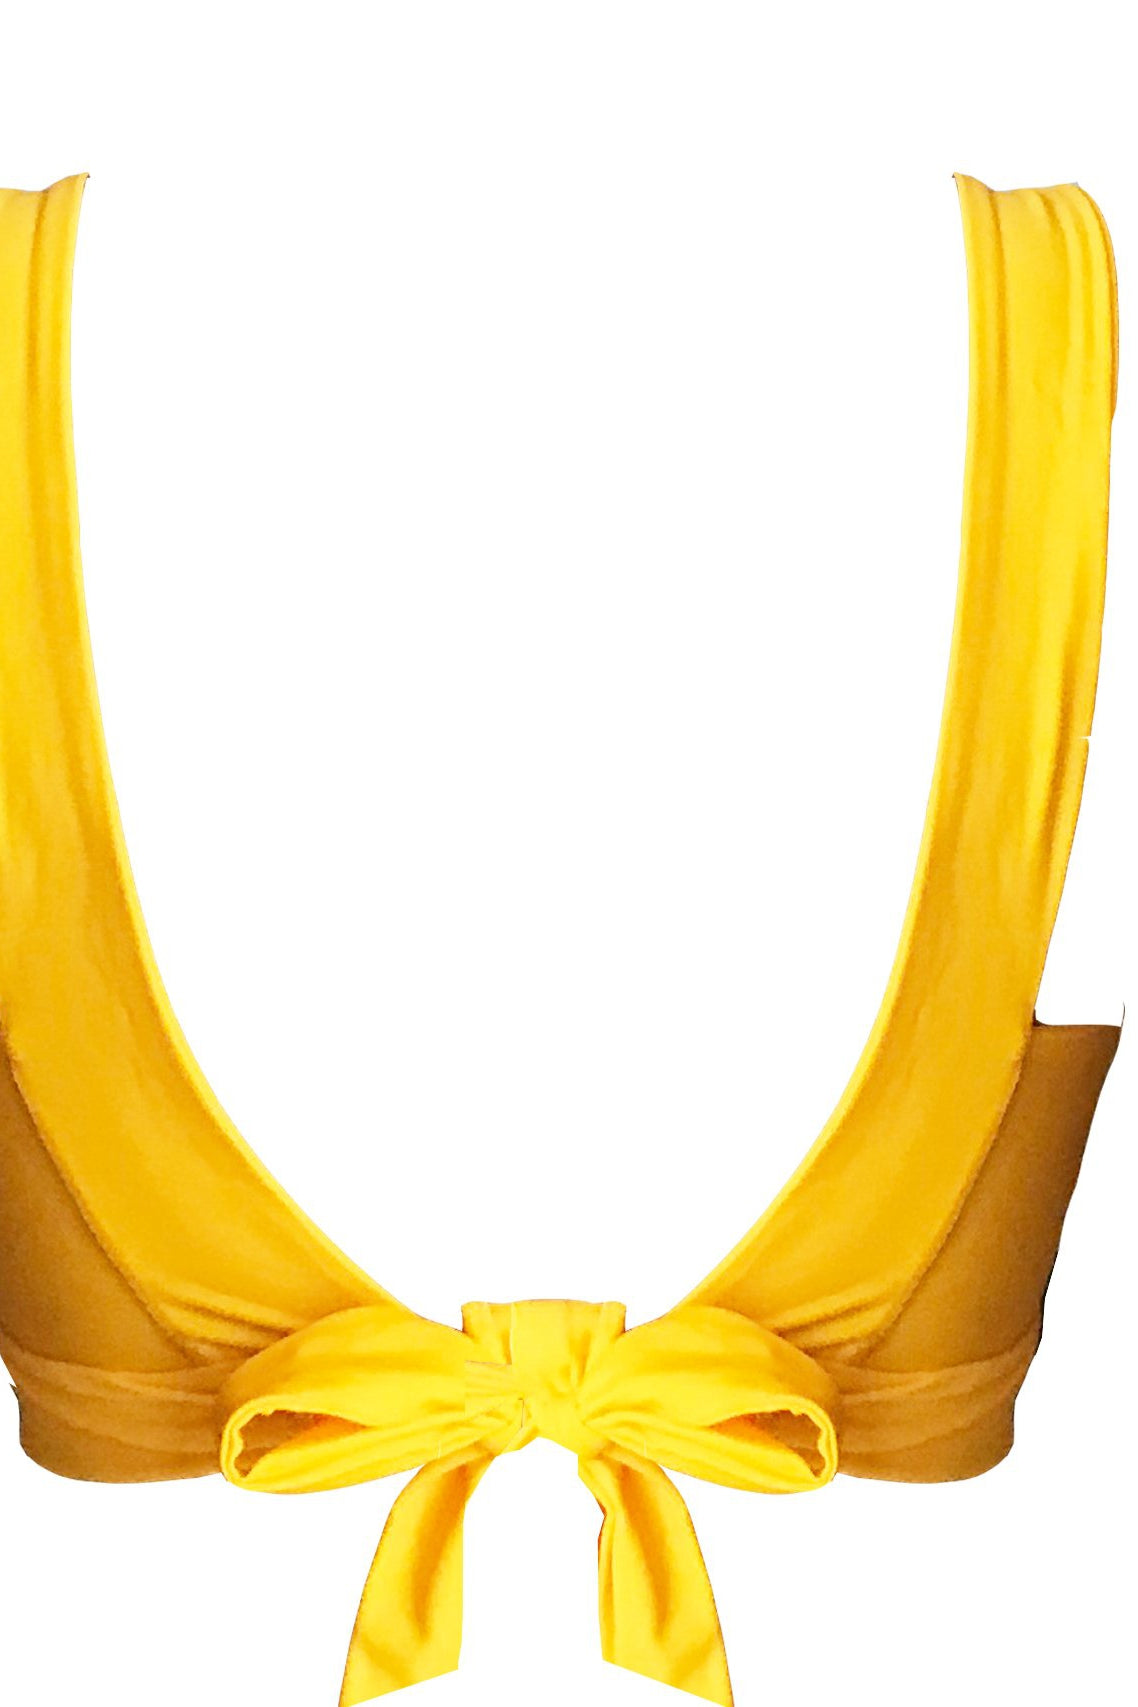 The back of a mustard yellow bikini top with adjustable ties and thick supportive straps.